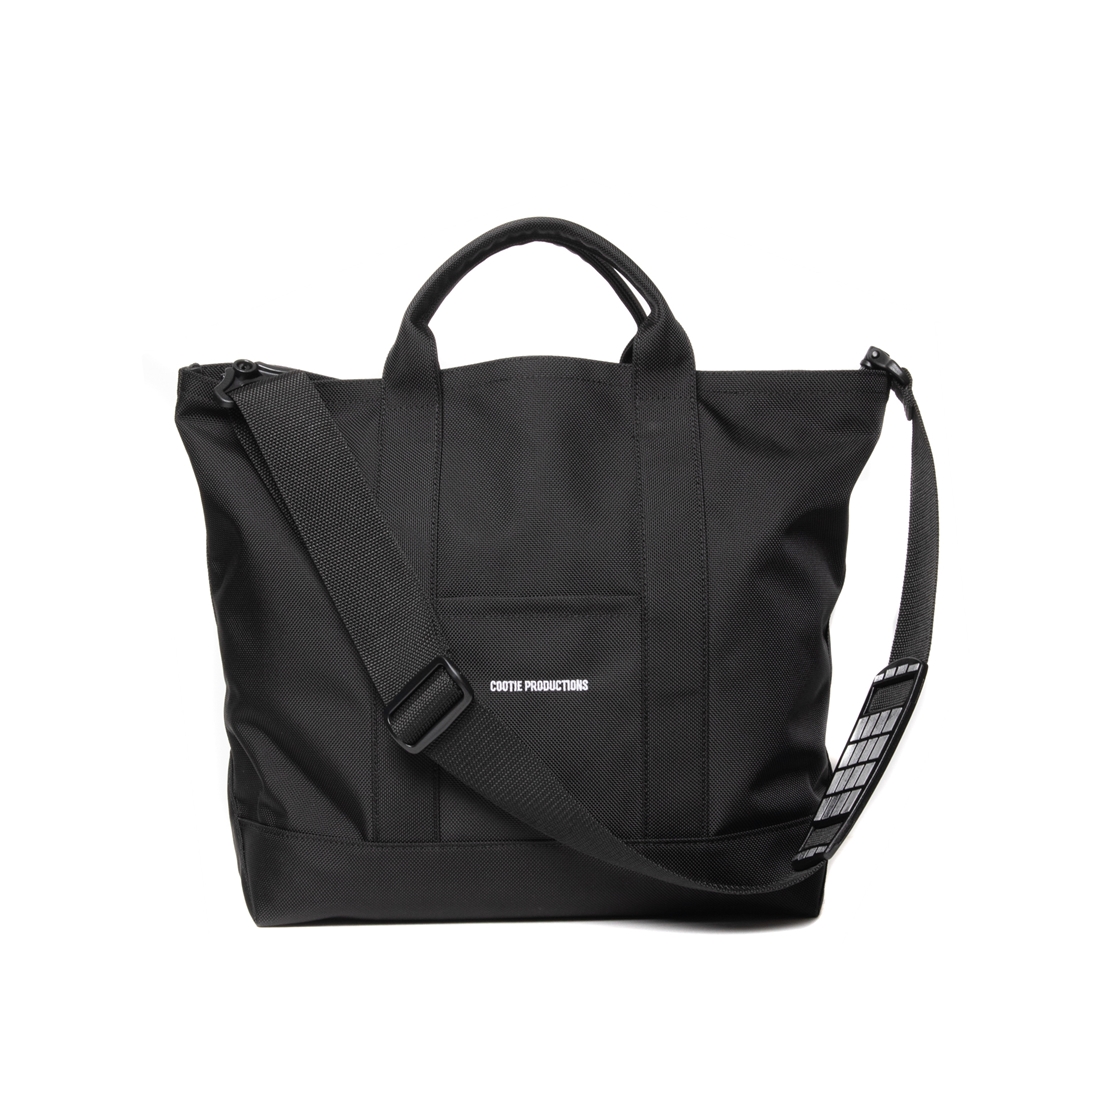 COOTIE PRODUCTIONS/Standard Tote Bag - M（Black）［2WAYバッグ-23春